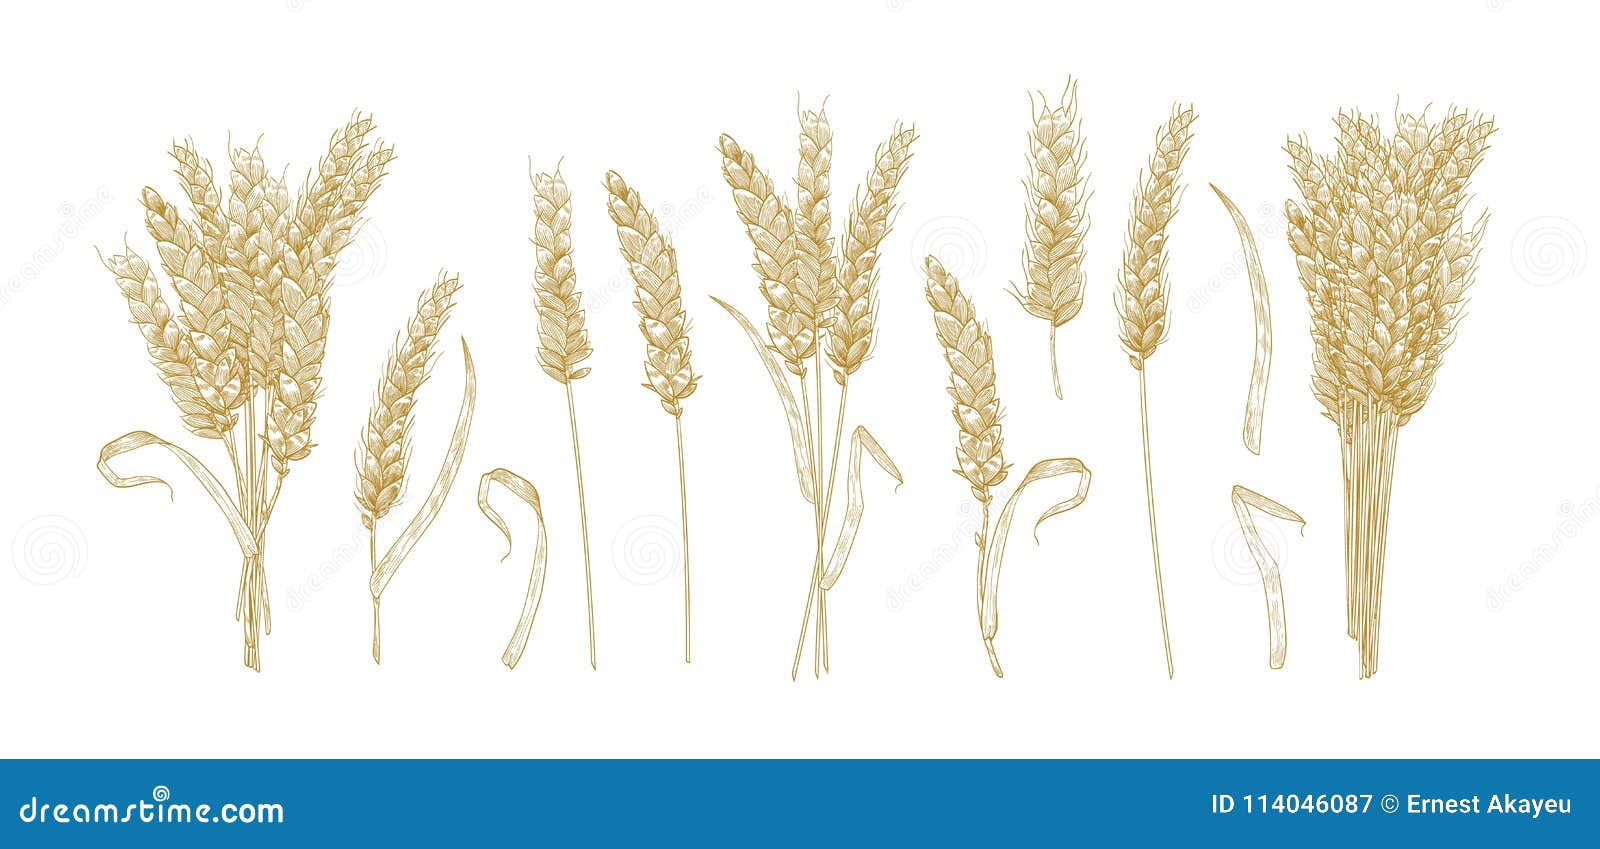 Collection Of Drawings Of Wheat Ears Isolated On White Background. Set ...